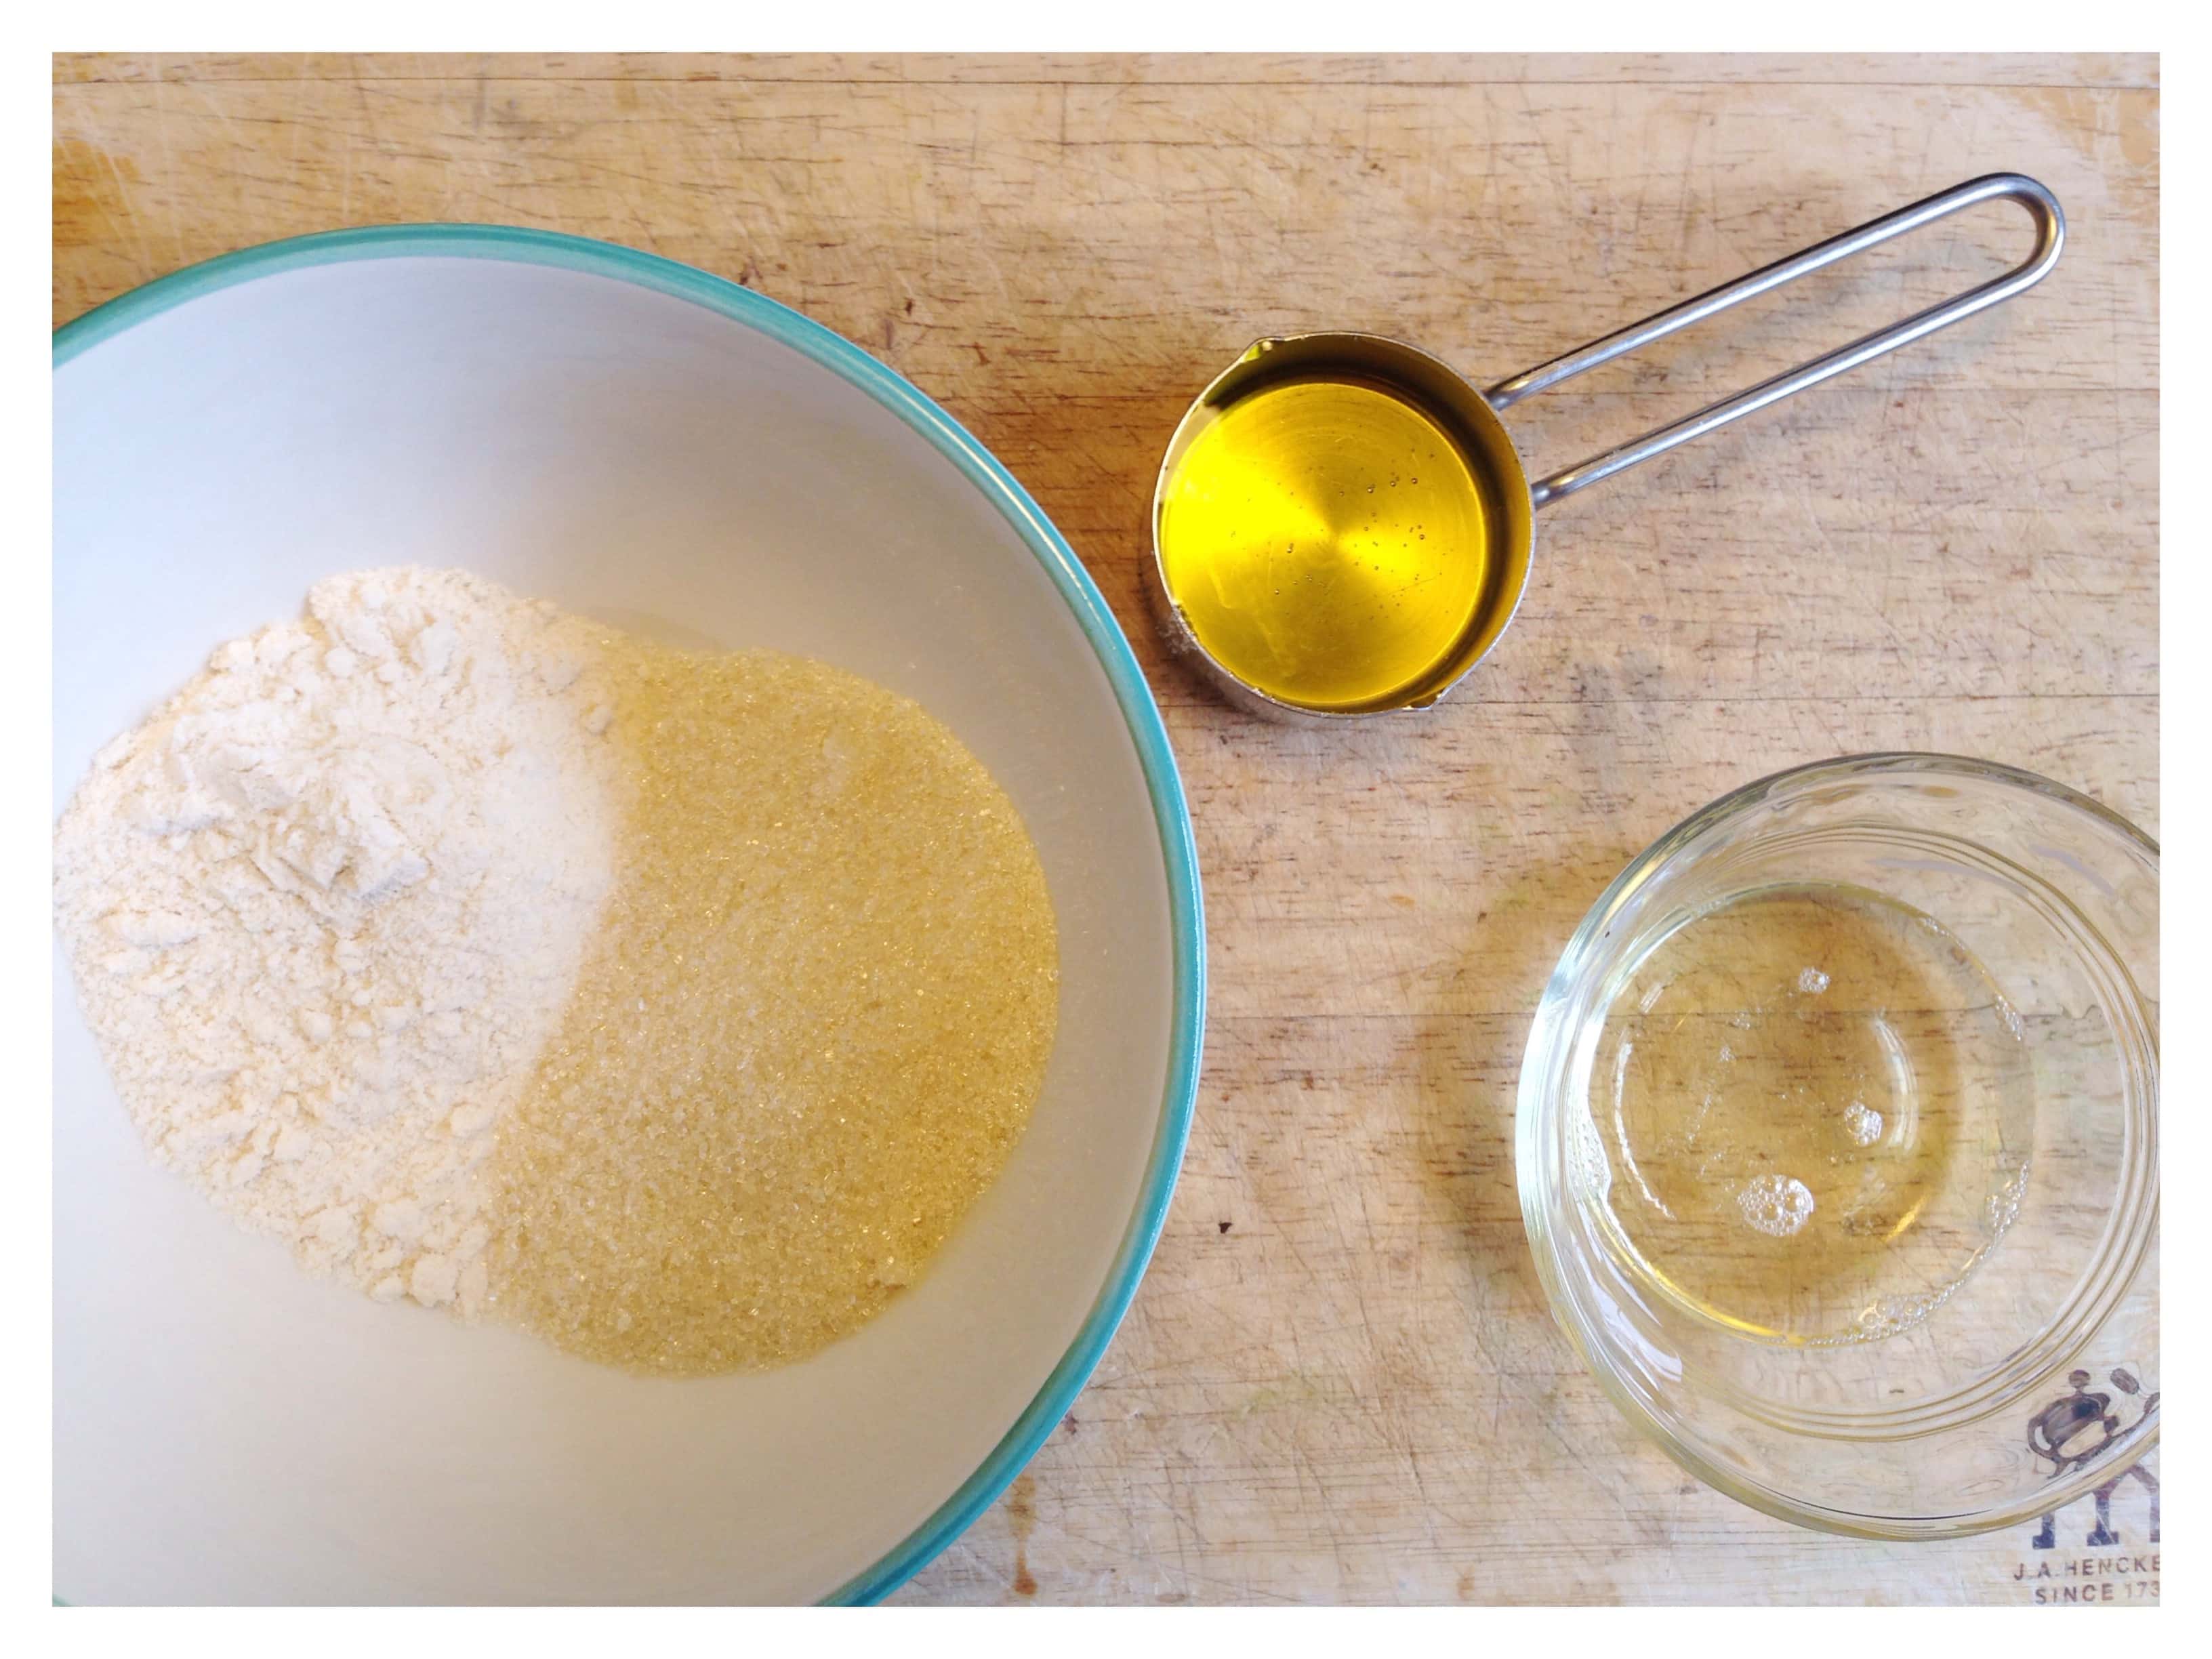 Homemade Facial Cleanser Recipe: 4 Simple Ingredients | Mother Rising